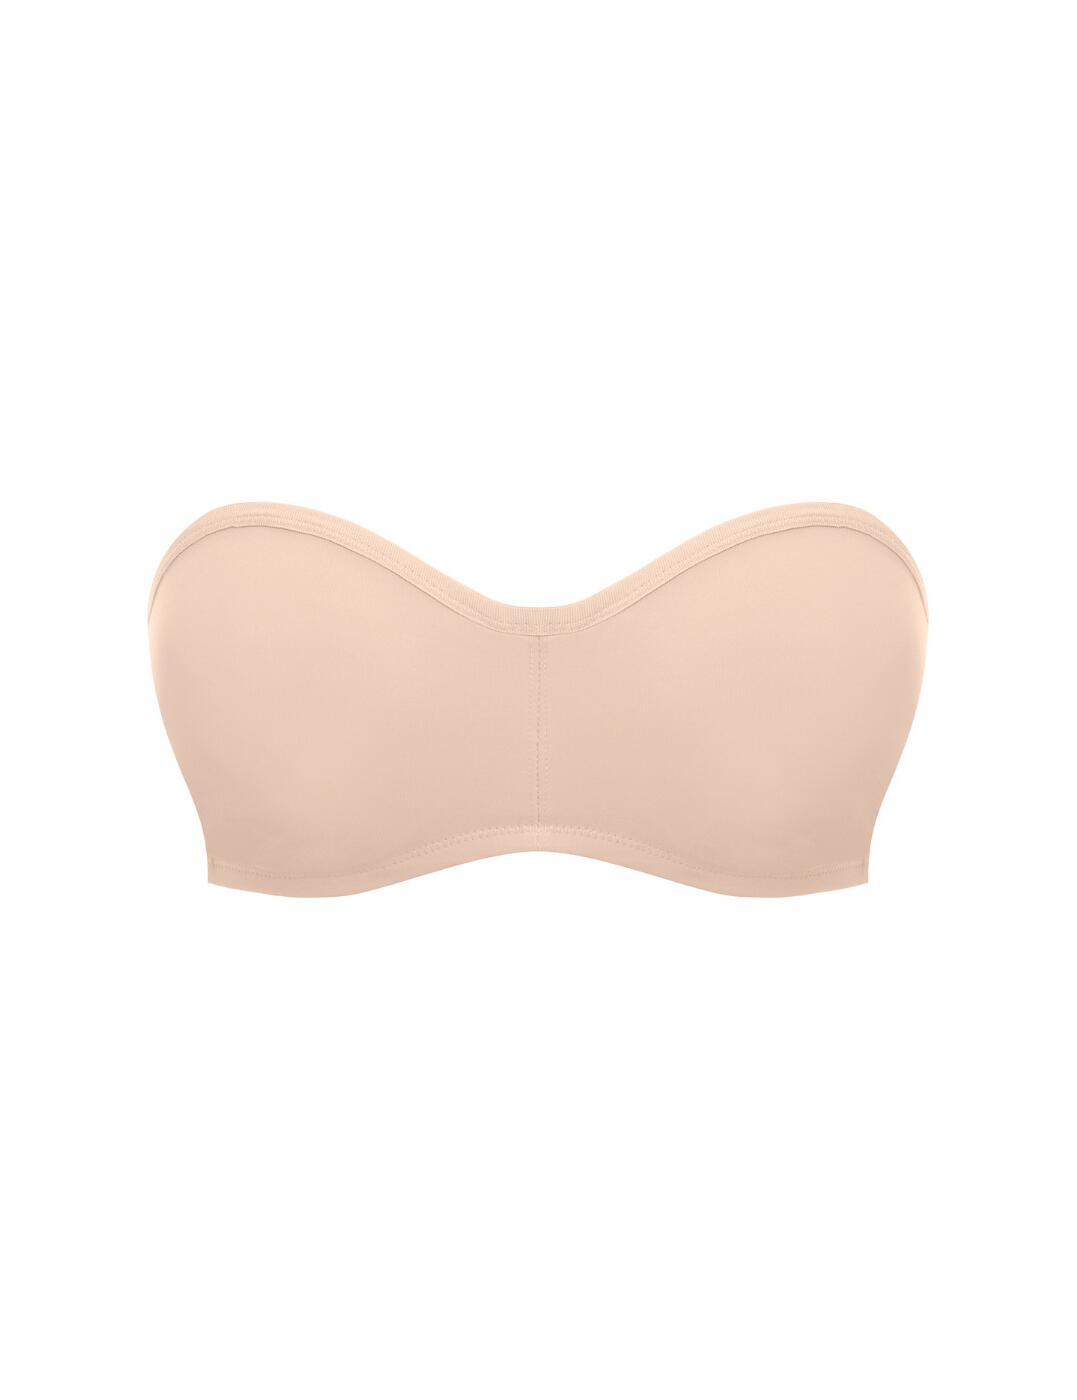 Wacoal Accord Strapless Bra Underwired Non-Padded Multiway Bras 600415